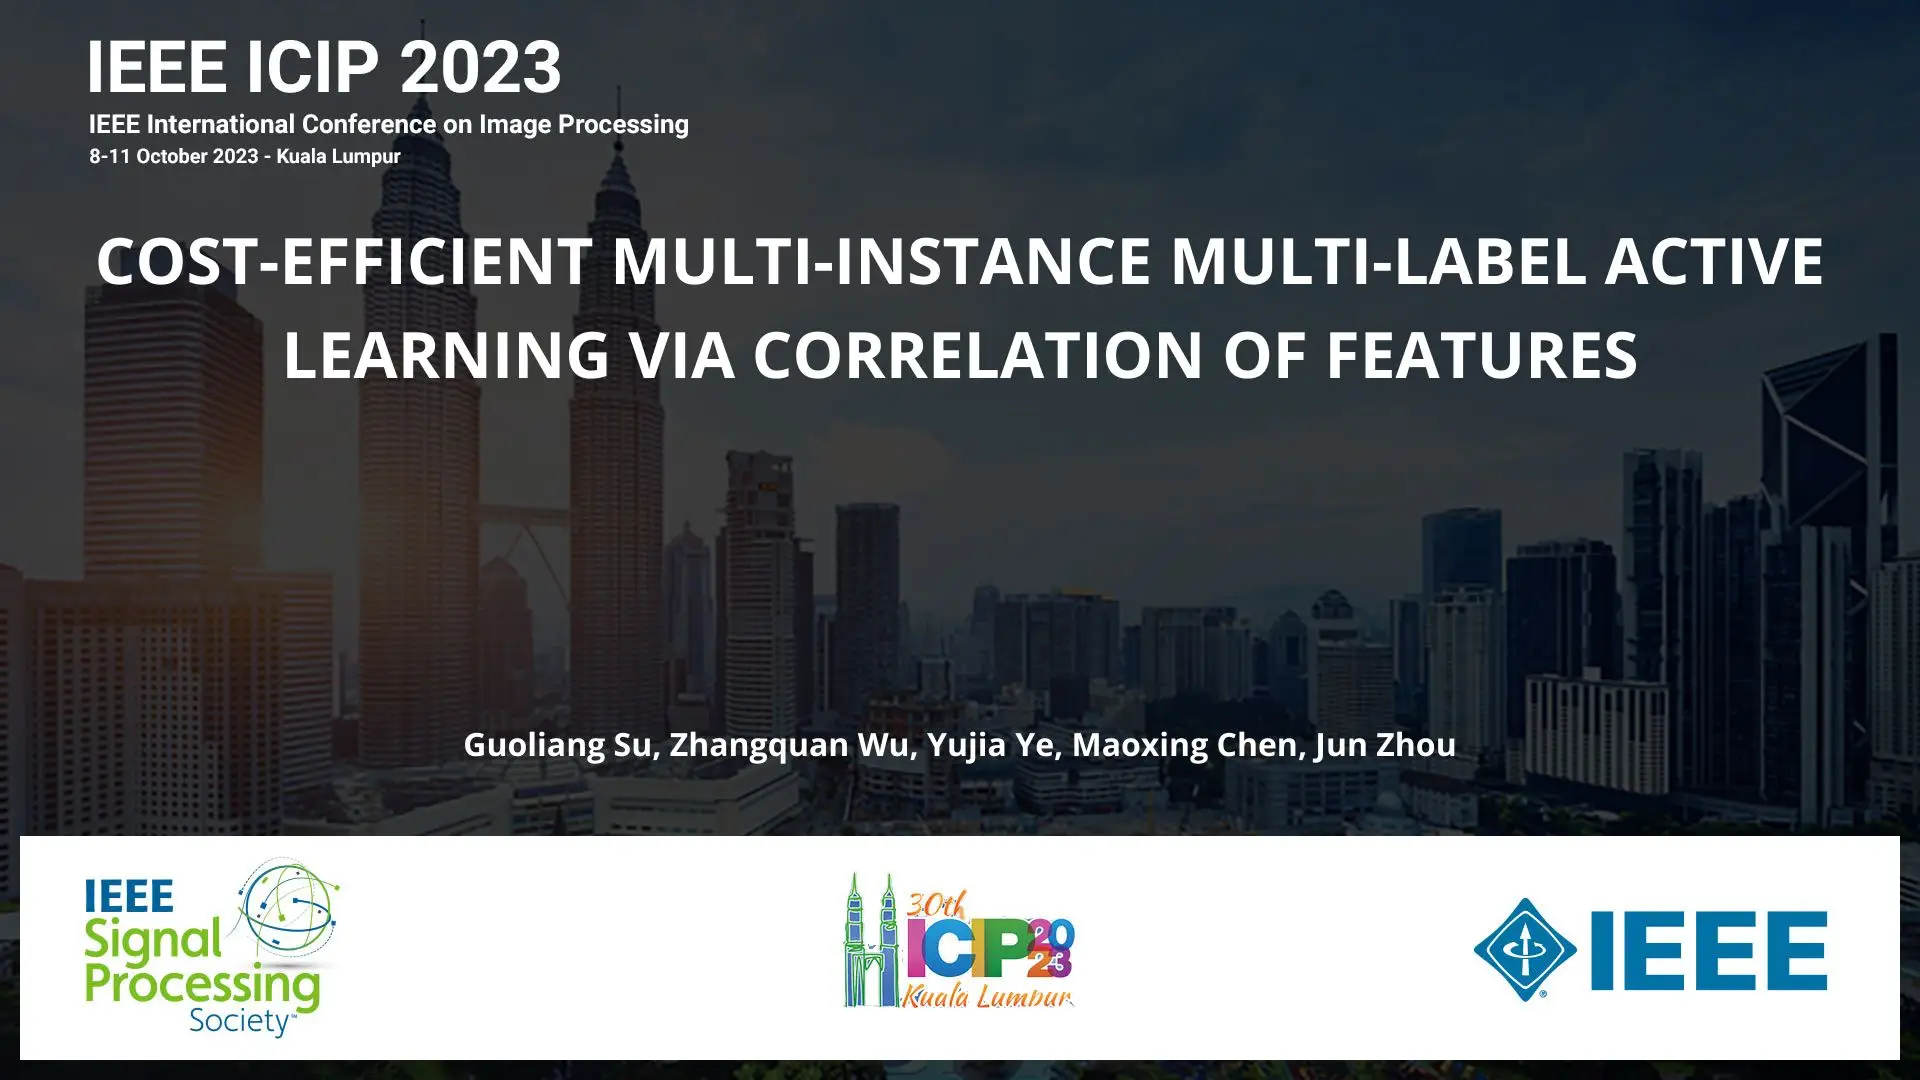 COST-EFFICIENT MULTI-INSTANCE MULTI-LABEL ACTIVE LEARNING VIA CORRELATION OF FEATURES